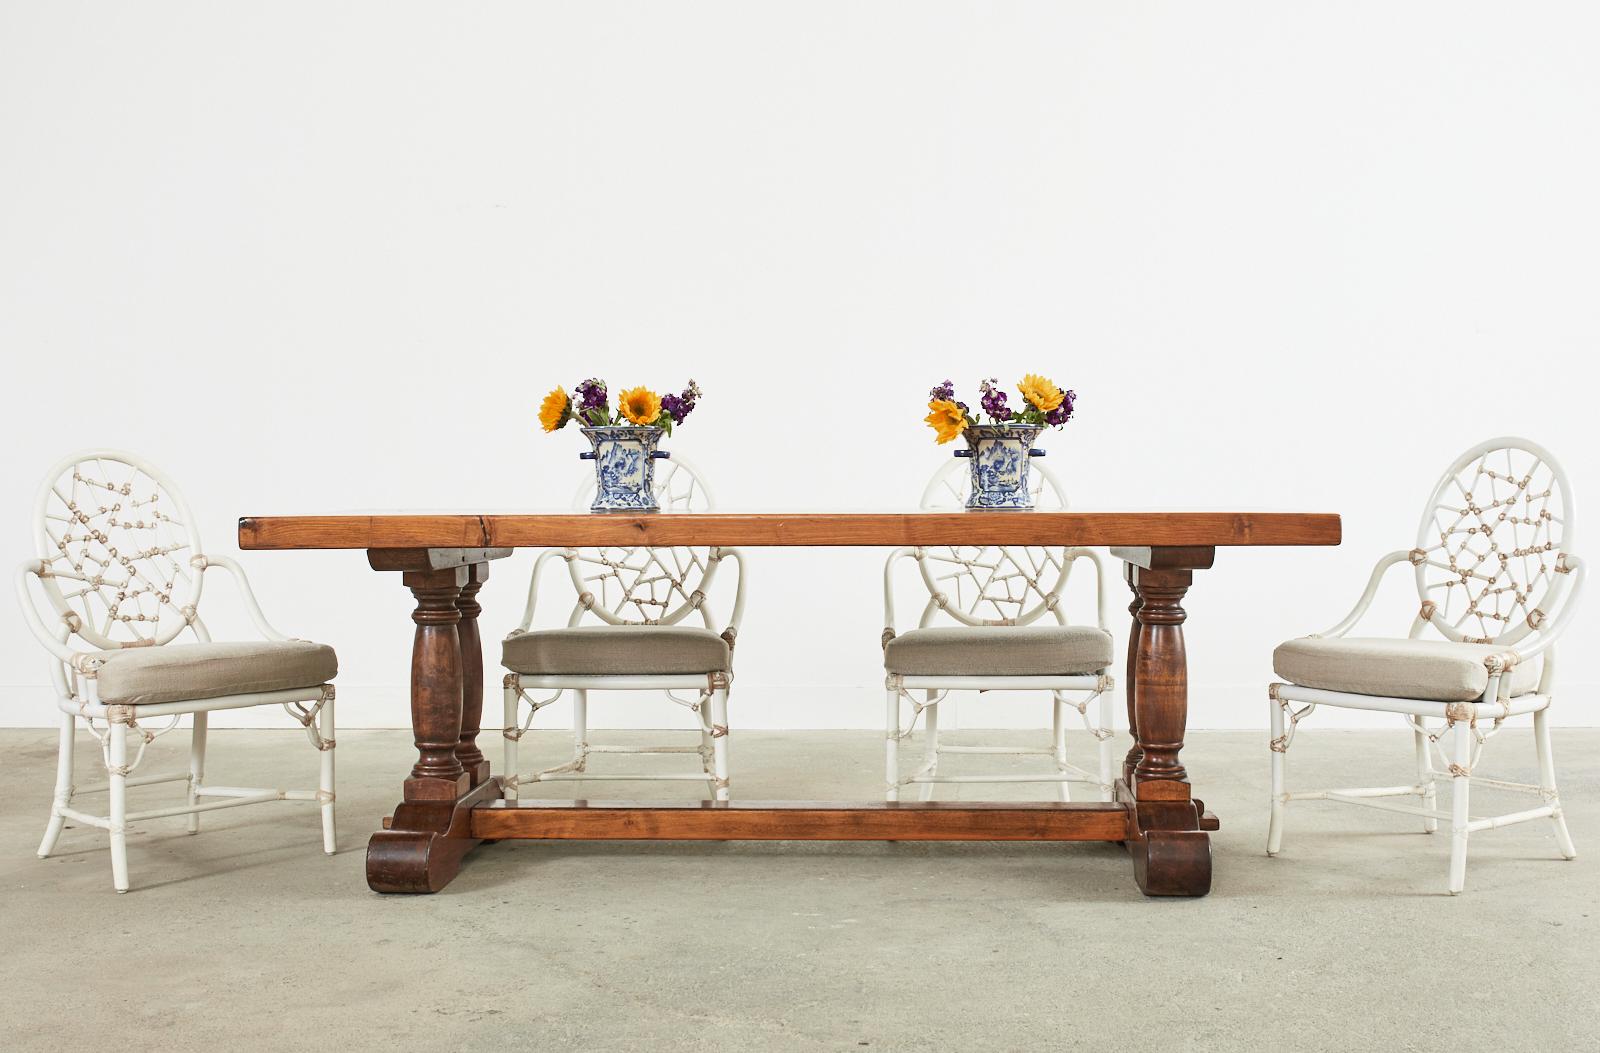 Imposing country French provincial farmhouse trestle dining table crafted from walnut. The table features a 2.5 inch thick walnut plank top with a warm honey toned finish. The large top is supported by a trestle base with double baluster form legs